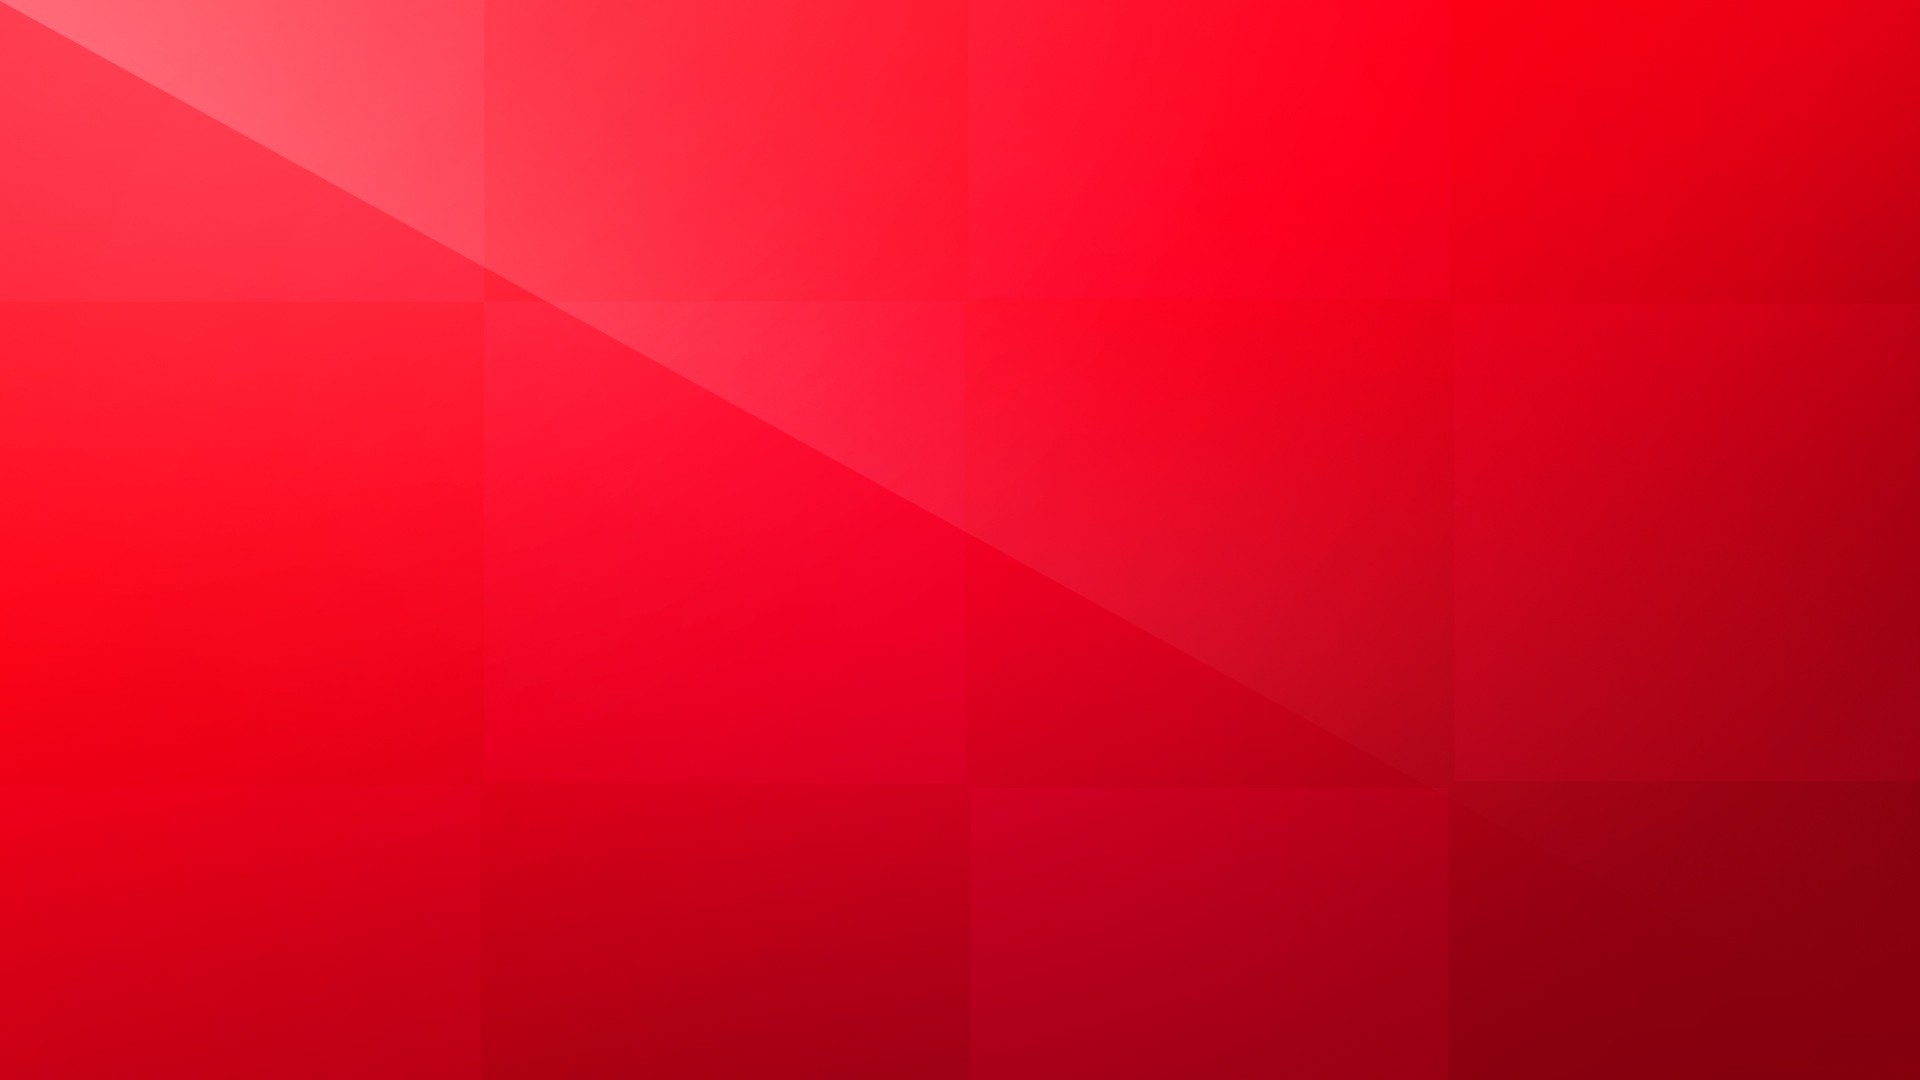 Bright Maroon Deep Red Colored Gradient Effect Wallpaper Texture Xmas  Vector Starry Background Wallpaper Horizontal Stock Illustration  Download  Image Now  iStock